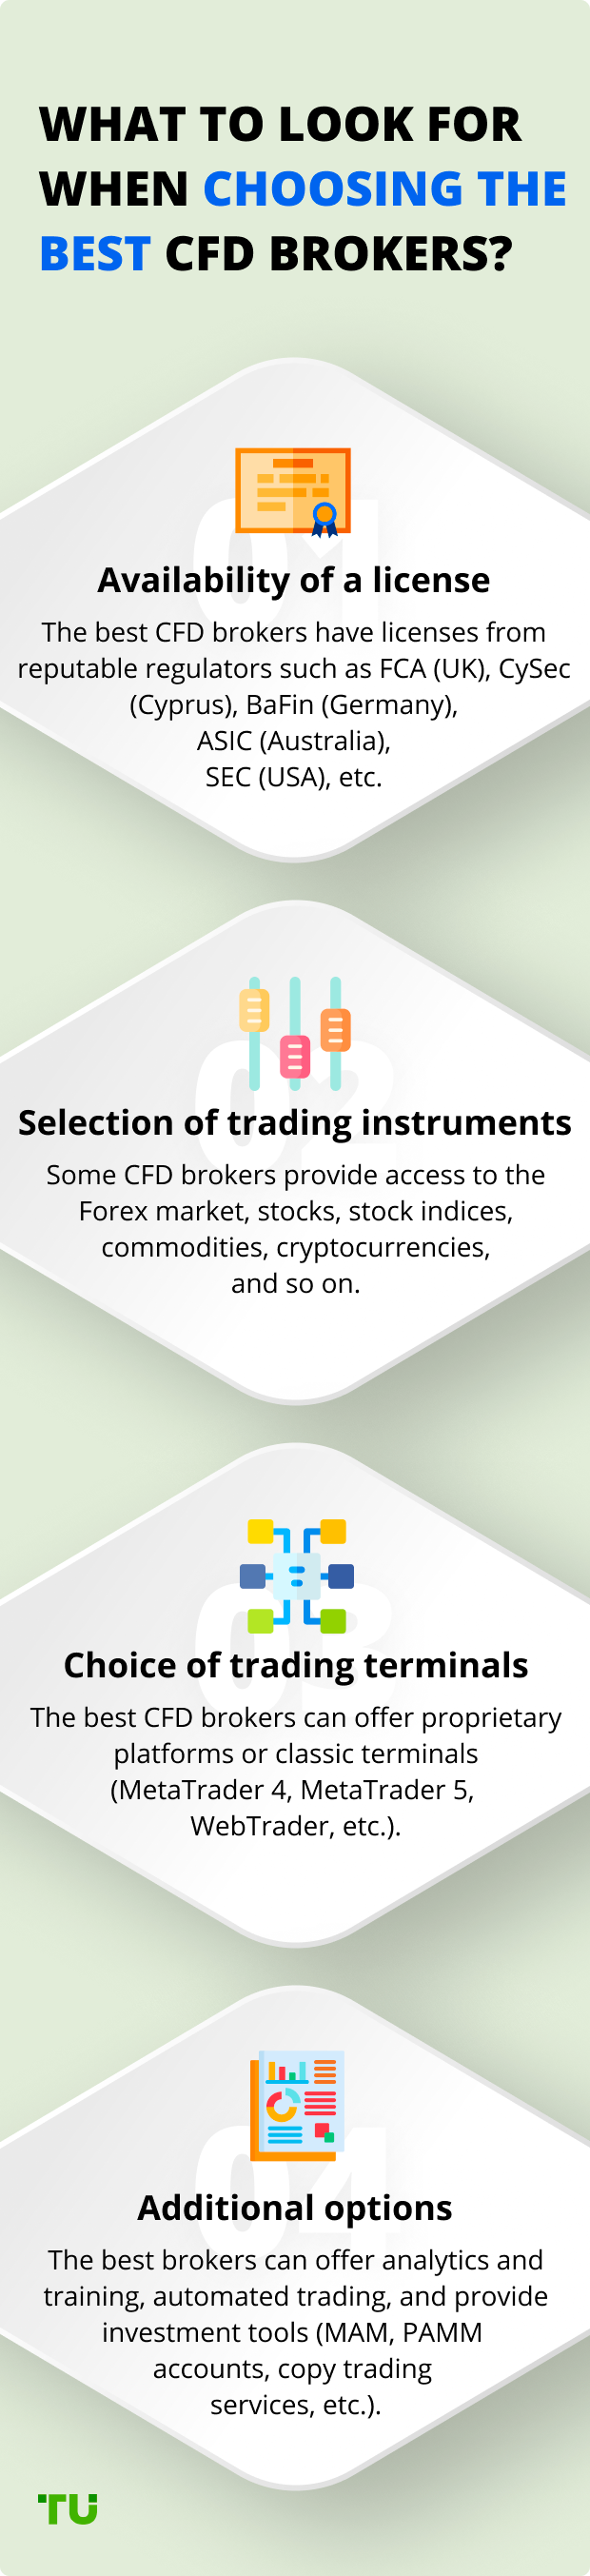 What to look for when choosing the best CFD brokers?